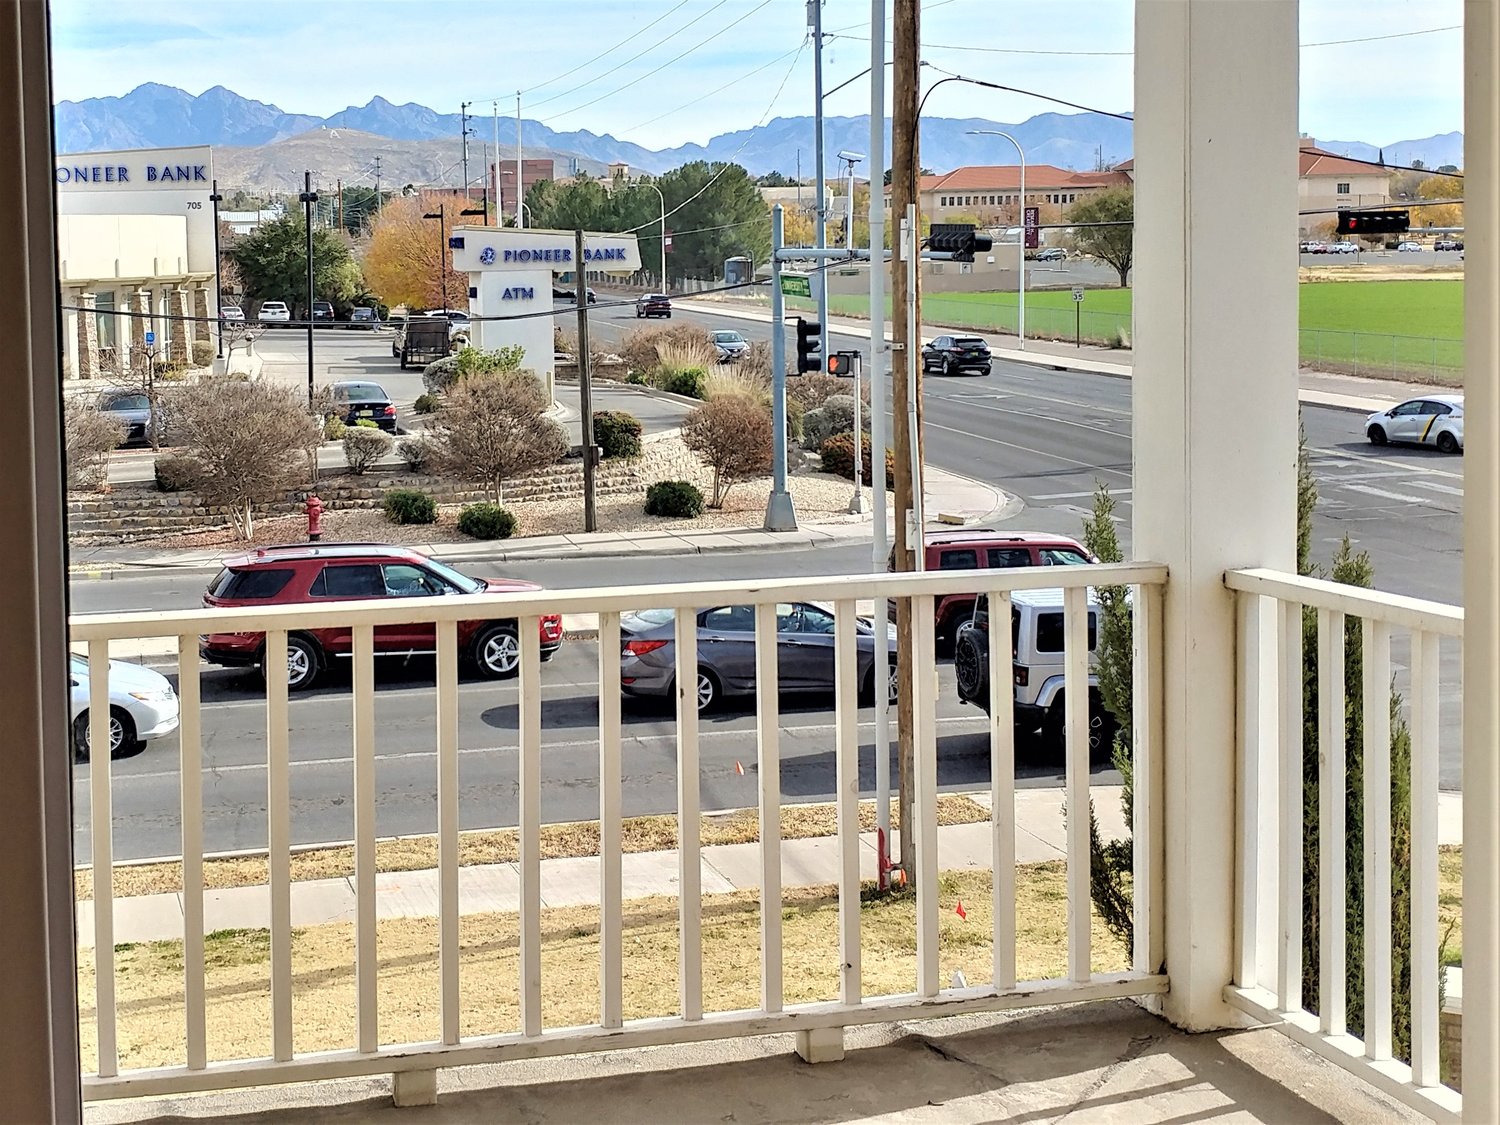 The view from the top floor of the Hadley-Ludwick House, which is being renovated and will become the new home of the Community Foundation of Southern New Mexico and Las Cruces CASA (Court Appointed Special Advocates).